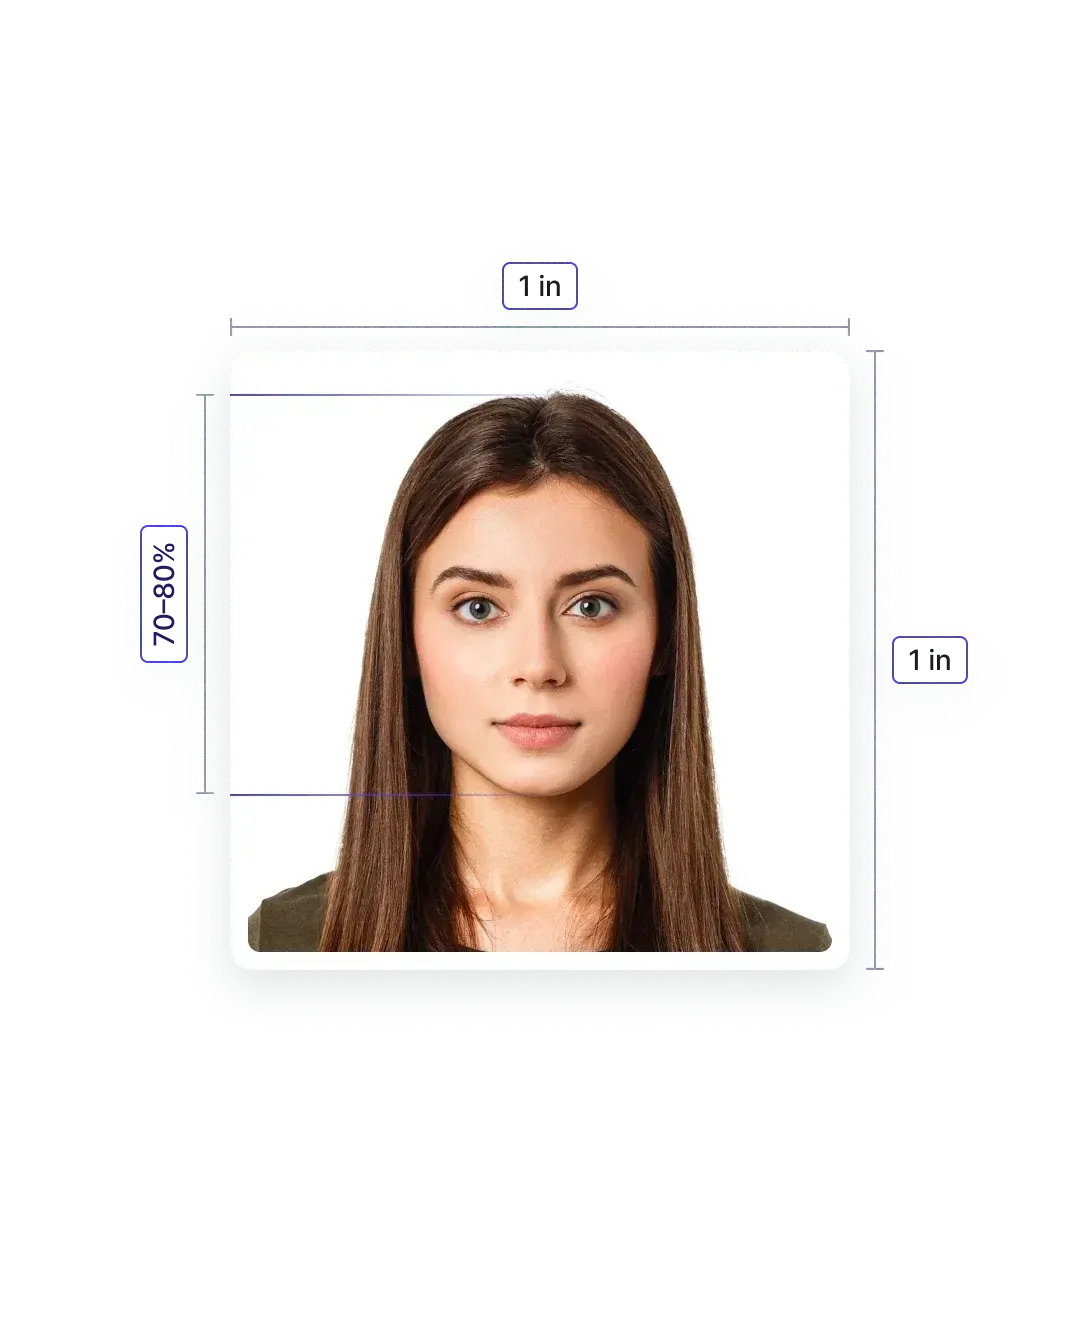 1x1″ Photo—Specifications